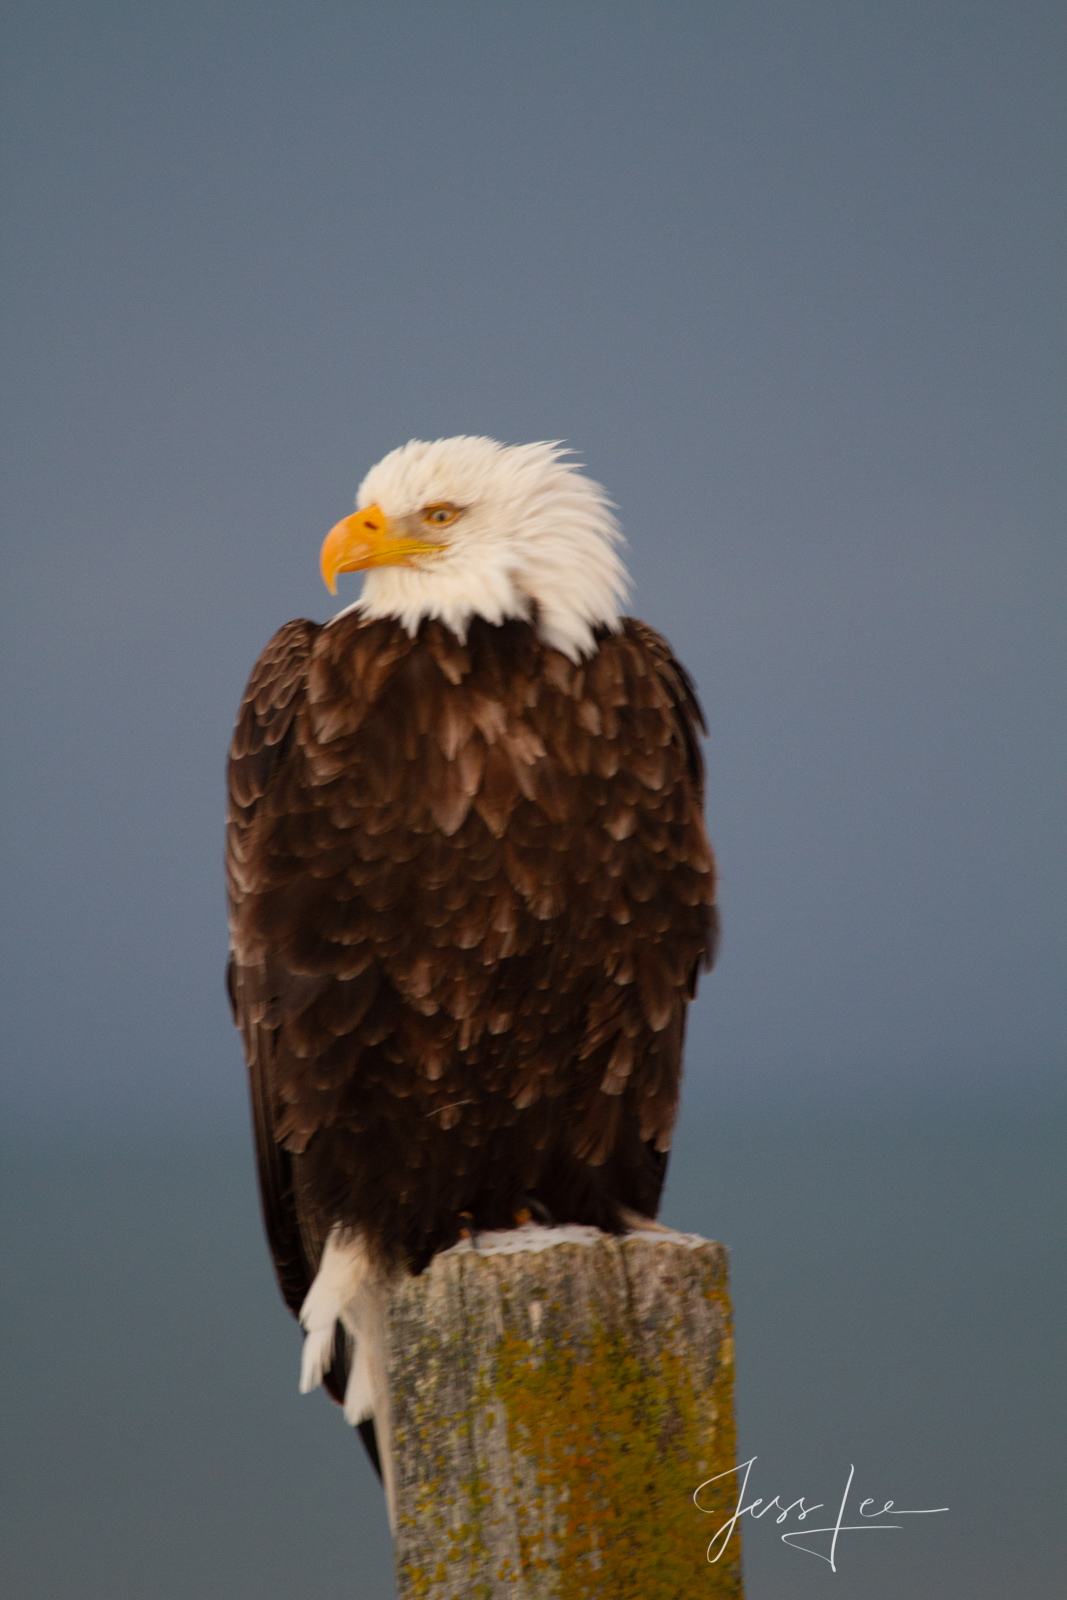 Bring home the power and beauty of the amazing fine art American Bald Eagle photograph Chill by Jess Lee from his Wildlife Photography...